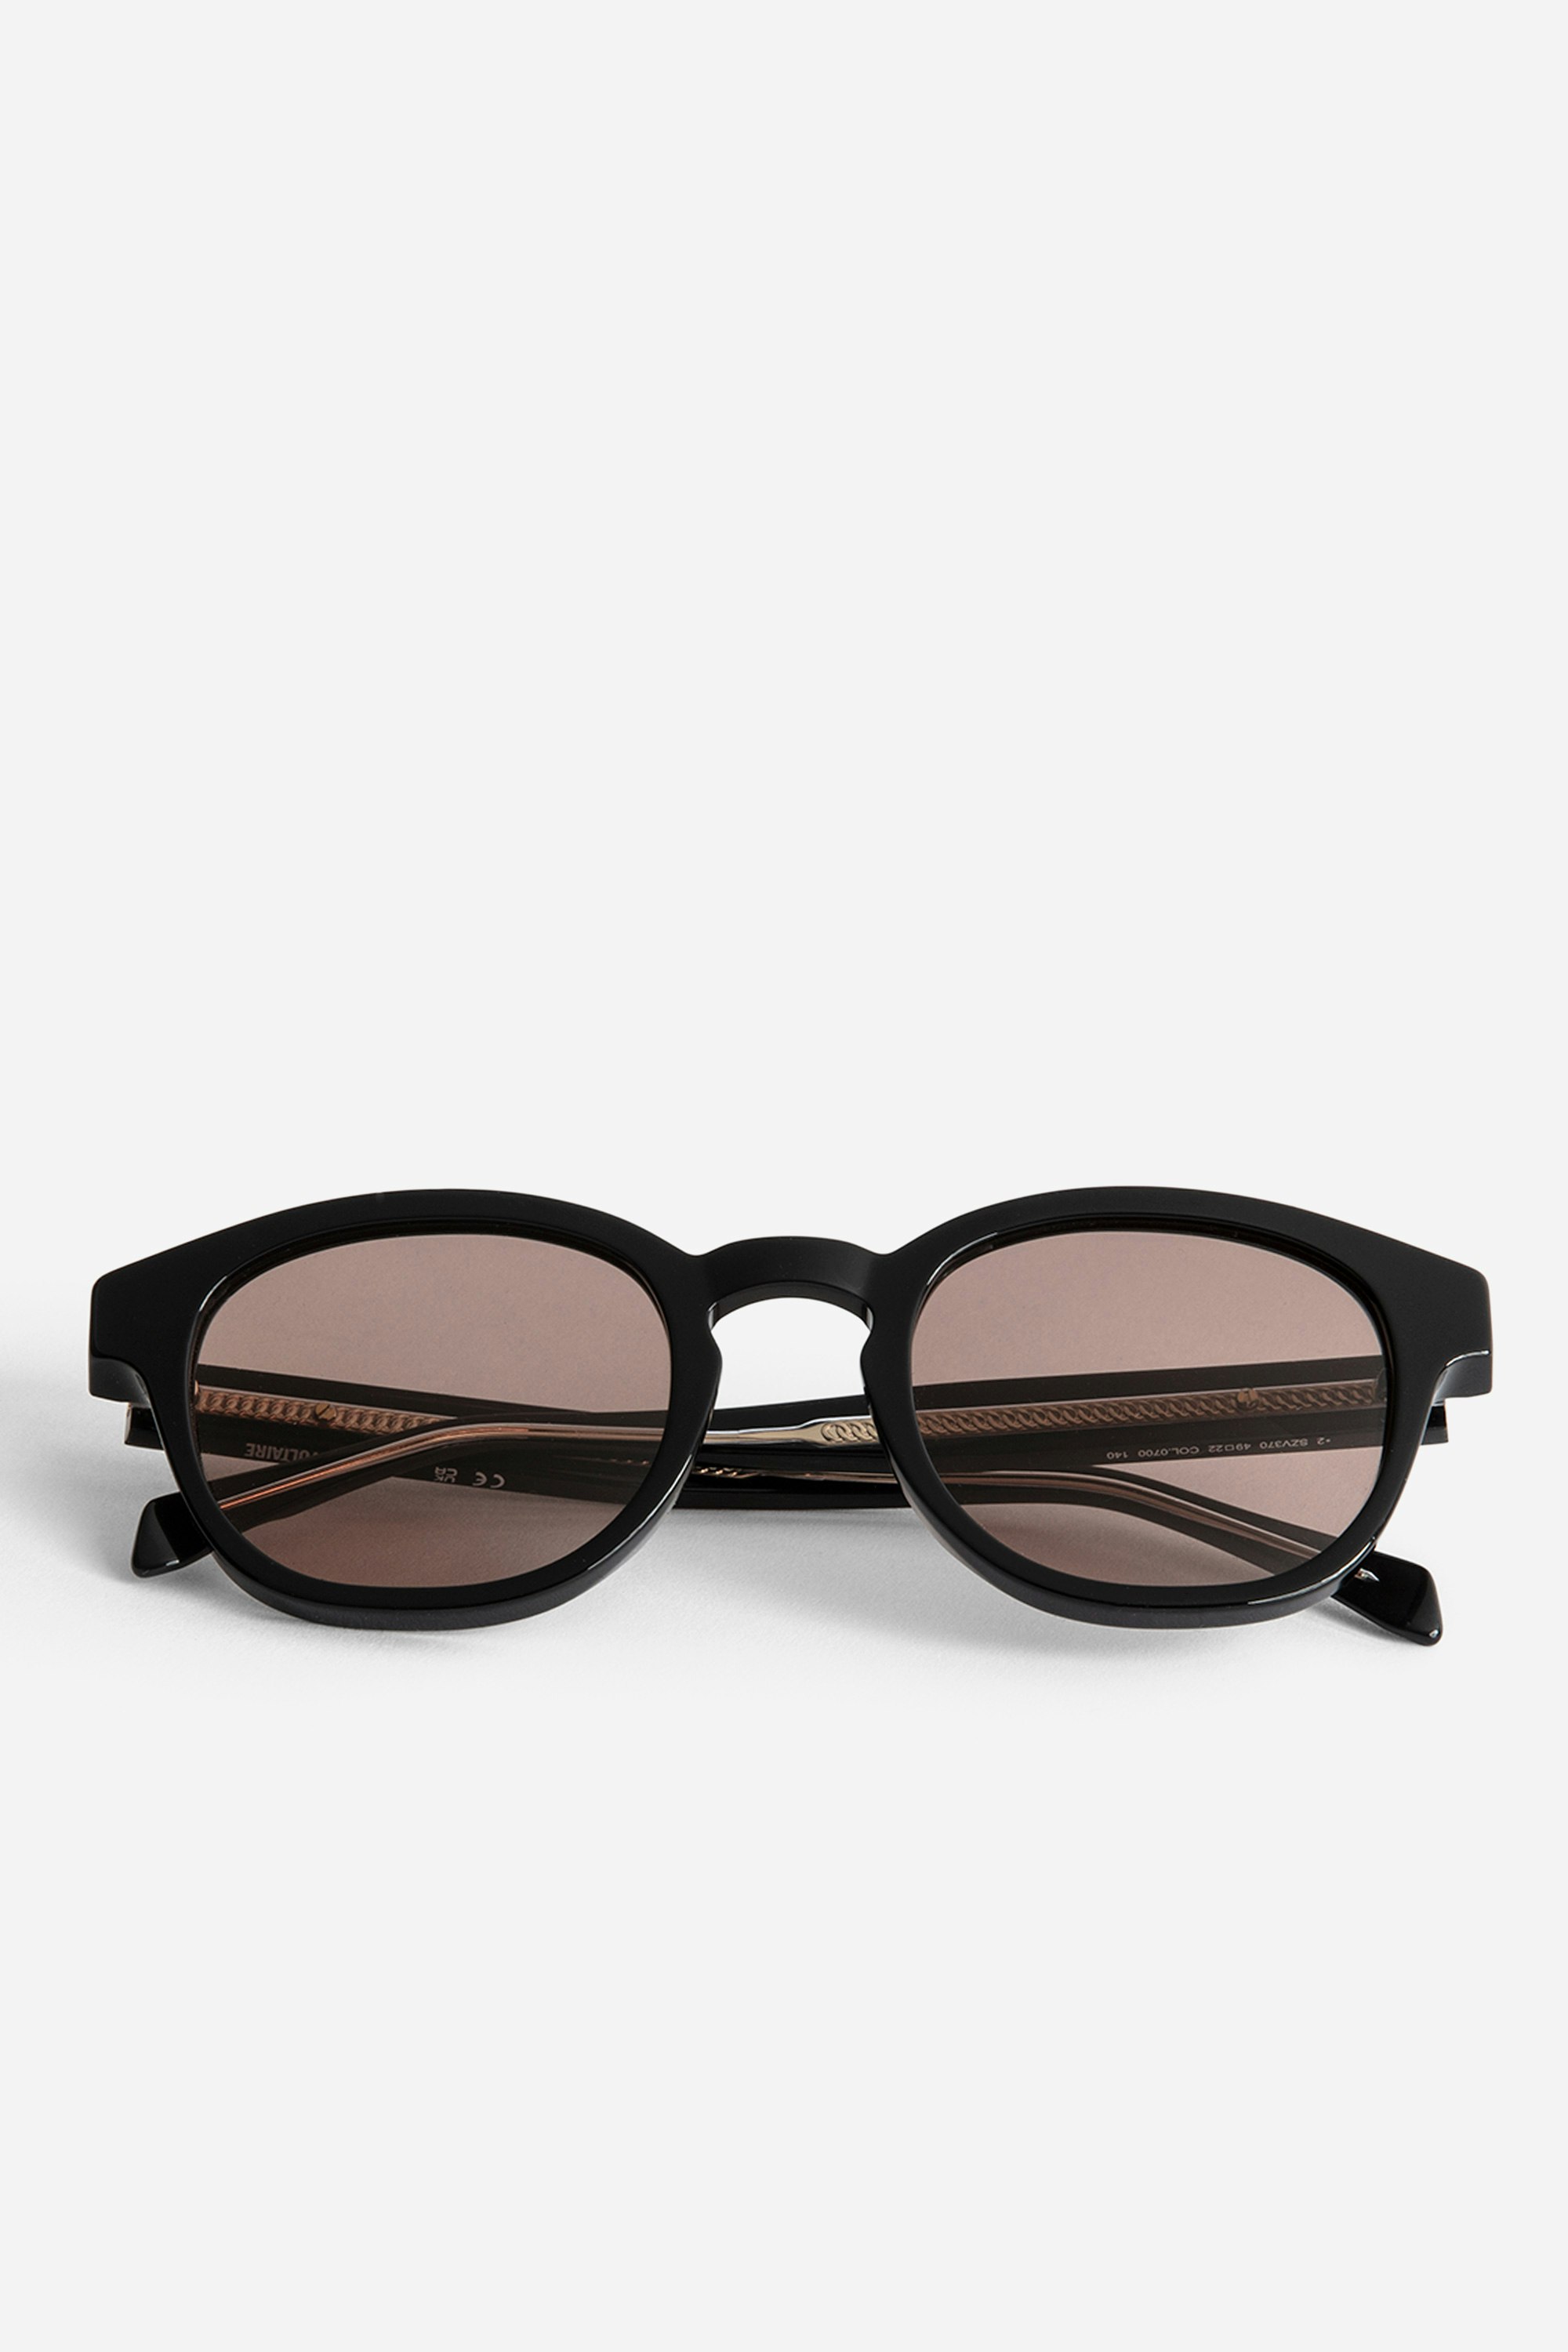 ZV23H6 Sunglasses - Unisex brown rounded sunglasses with wings on the temples.